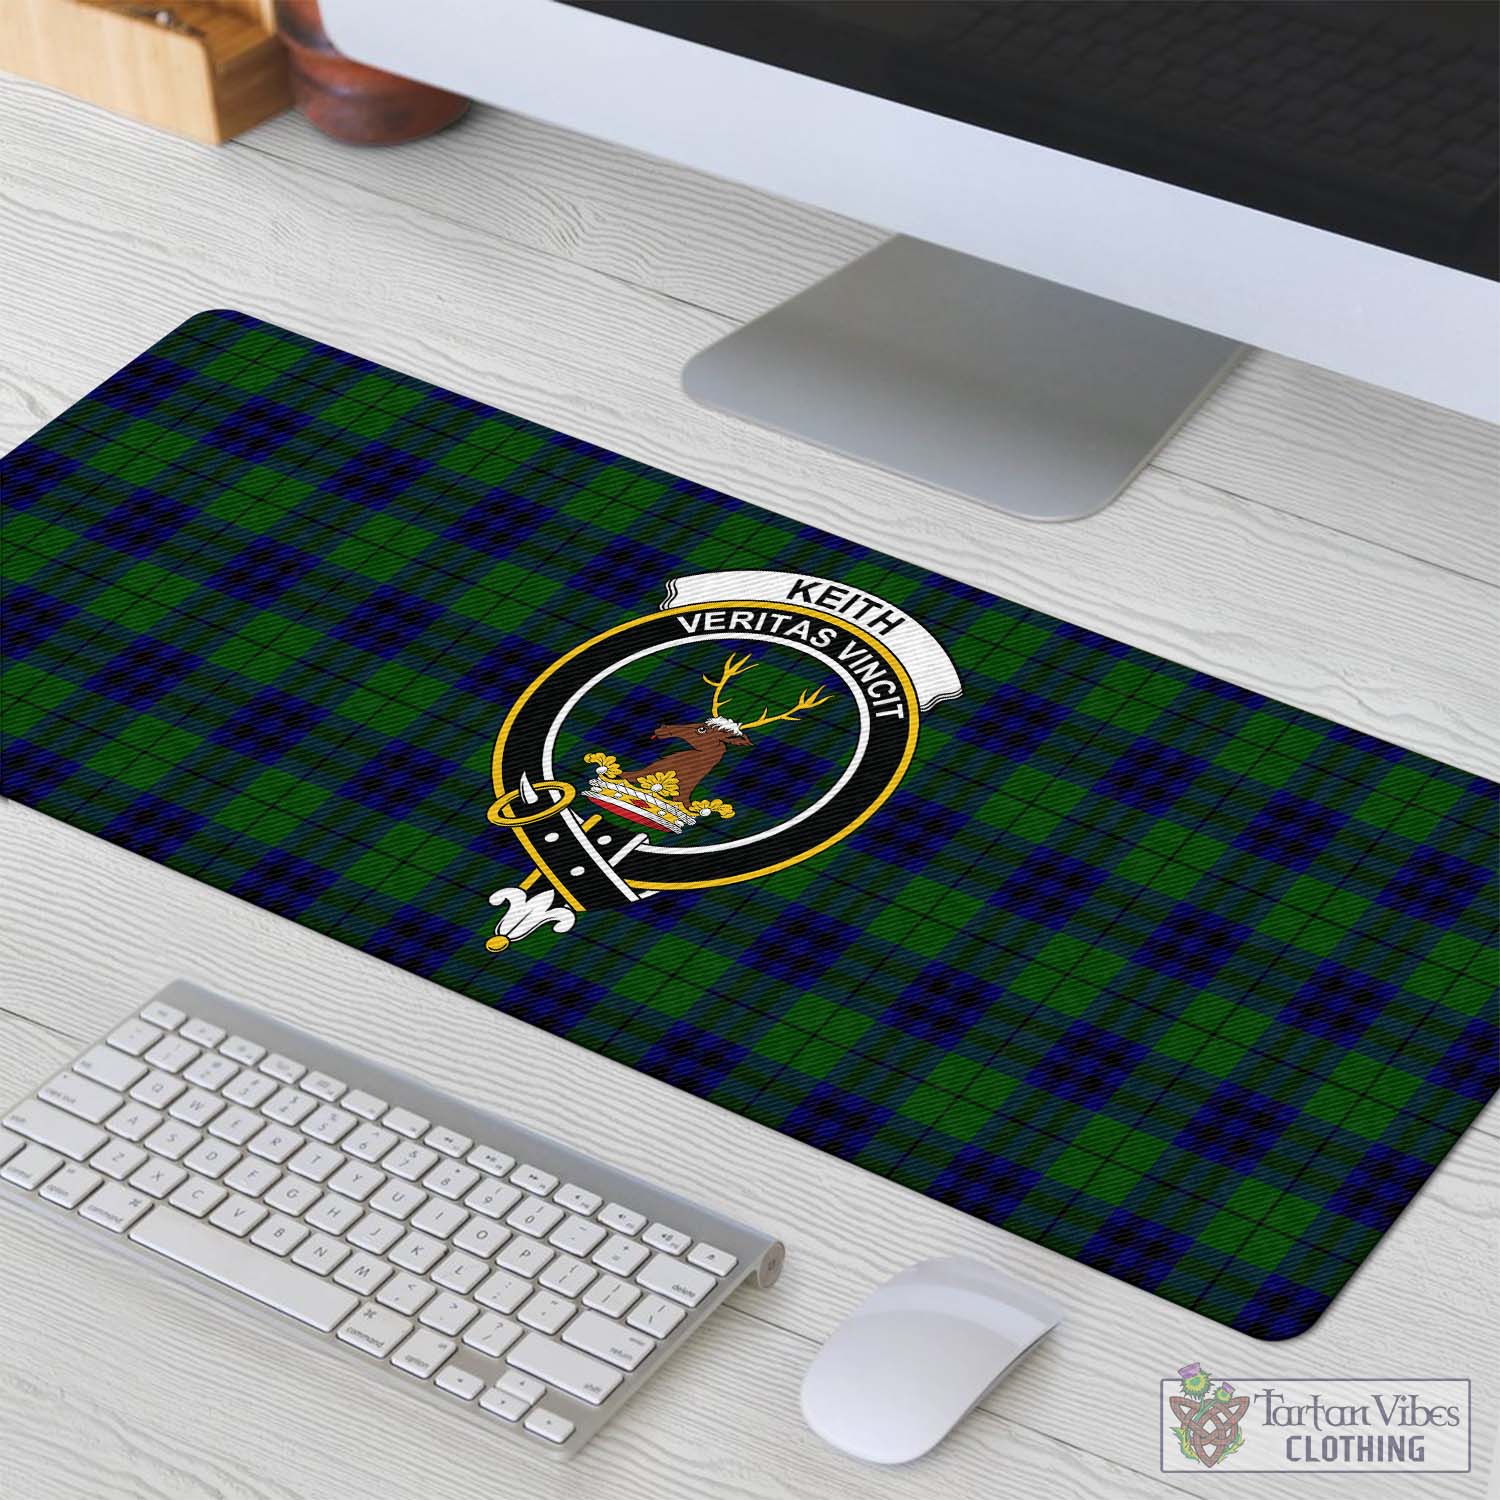 Tartan Vibes Clothing Keith Modern Tartan Mouse Pad with Family Crest